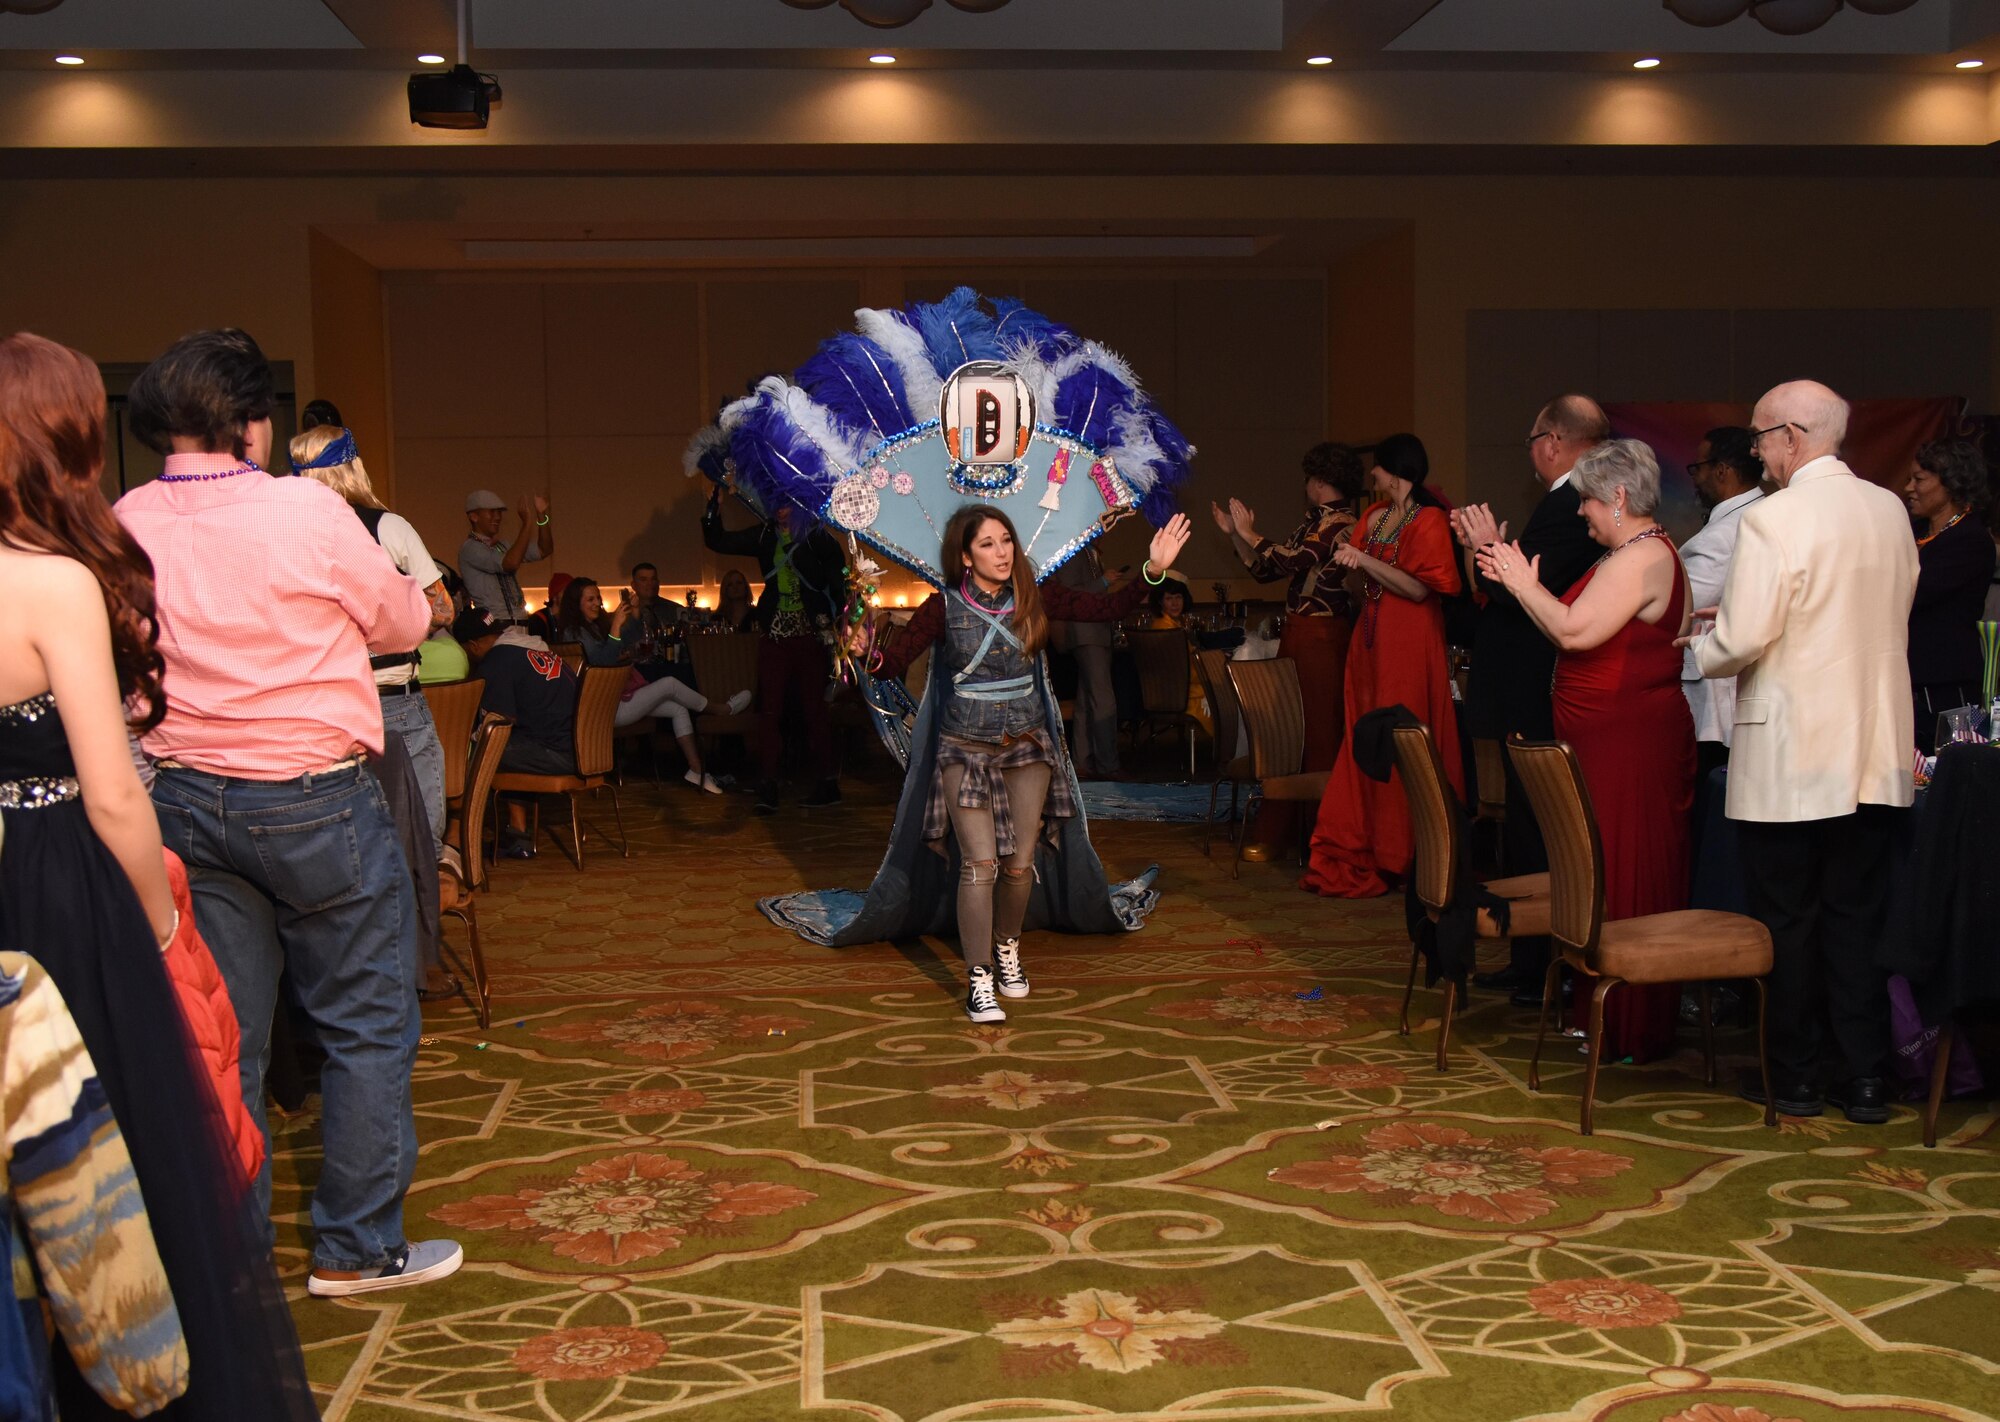 Capt. Francesca Culp, 81st Surgical Operations Squadron occupational therapy doctor, waves to the crowd after being named the 2017 Krewe of Medics Queen during the 29th Annual Krewe of Medics Mardi Gras Ball at the Bay Breeze Event Center Jan. 28, 2017, on Keesler Air Force Base, Miss. The Krewe of Medics hosts a yearly ball to give Keesler Medical Center personnel a taste of the Gulf Coast and an opportunity to experience a traditional Mardi Gras. The theme for this year's ball was Blast From The Past. (U.S. Air Force photo by Kemberly Groue)